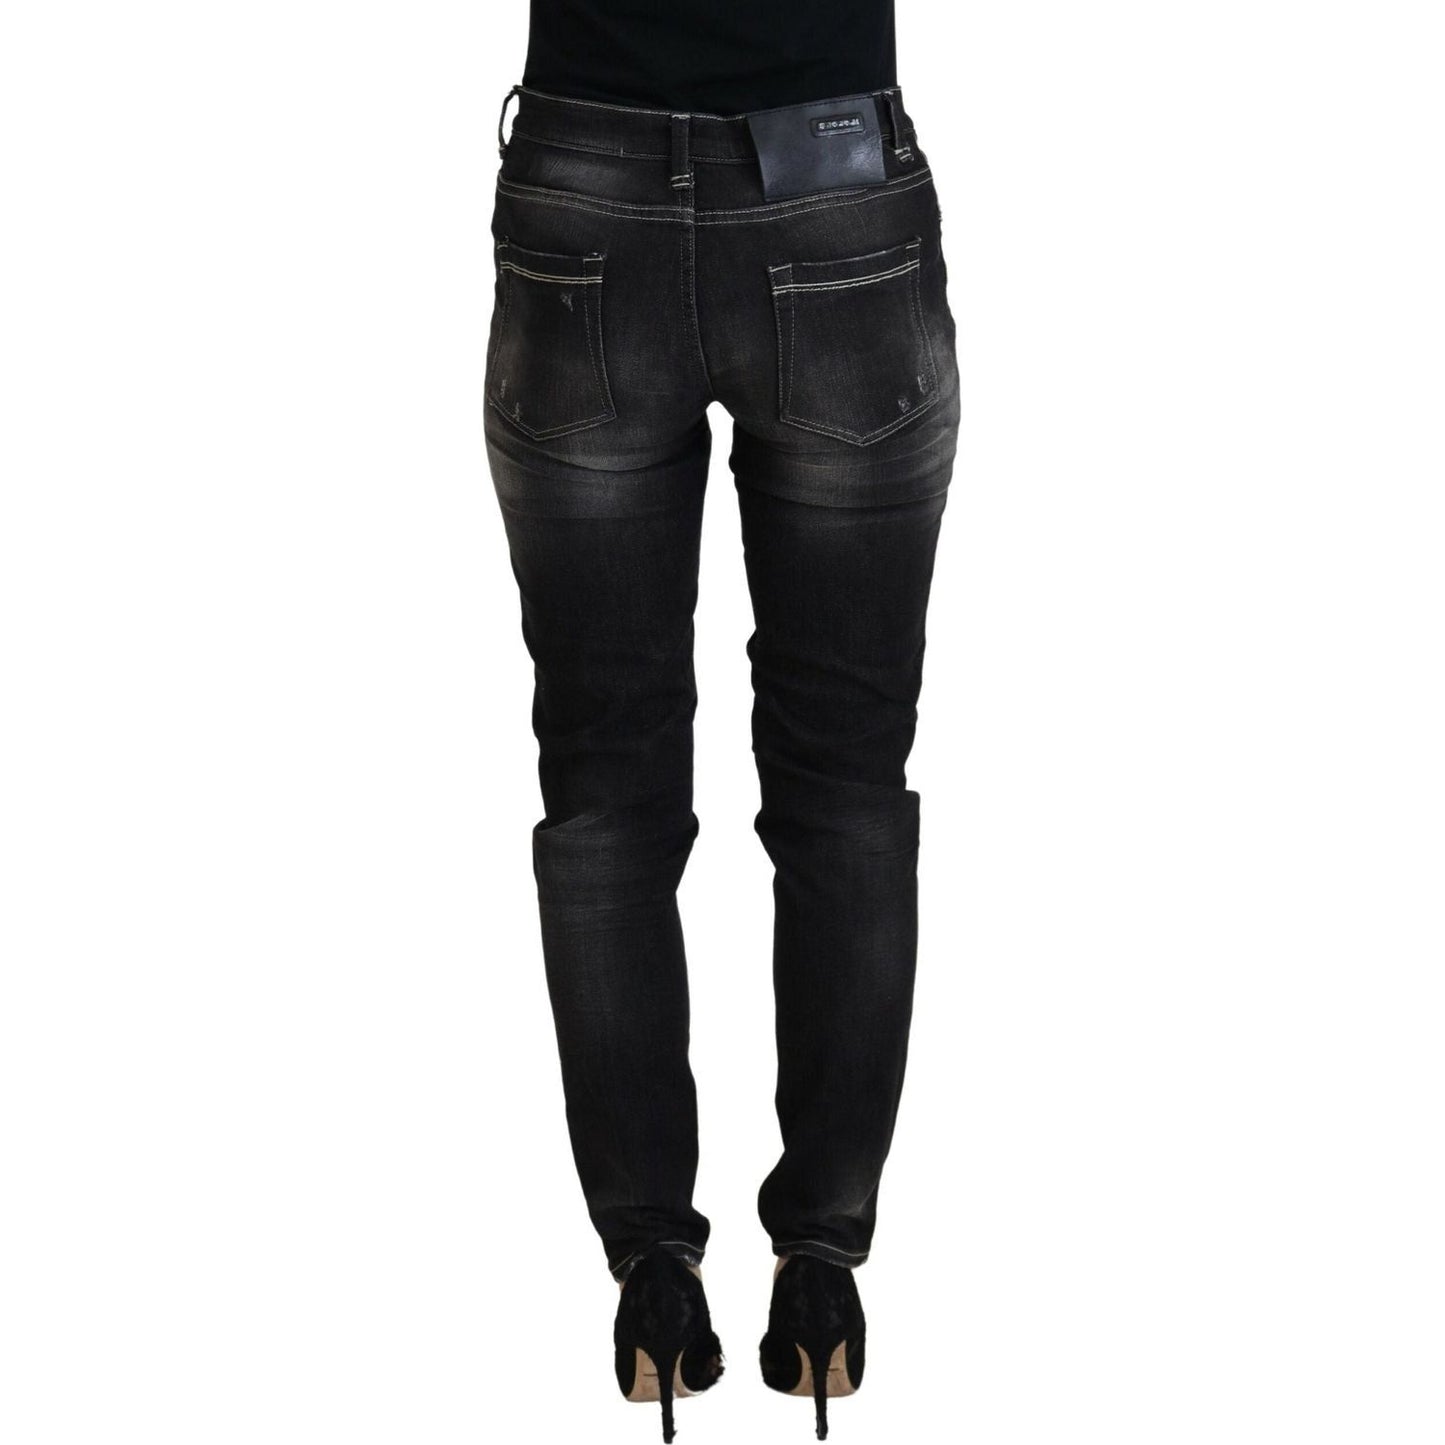 Acht Elegant Tapered Mid Waist Black Jeans black-washed-mid-waist-tapered-women-casual-denim-jeans